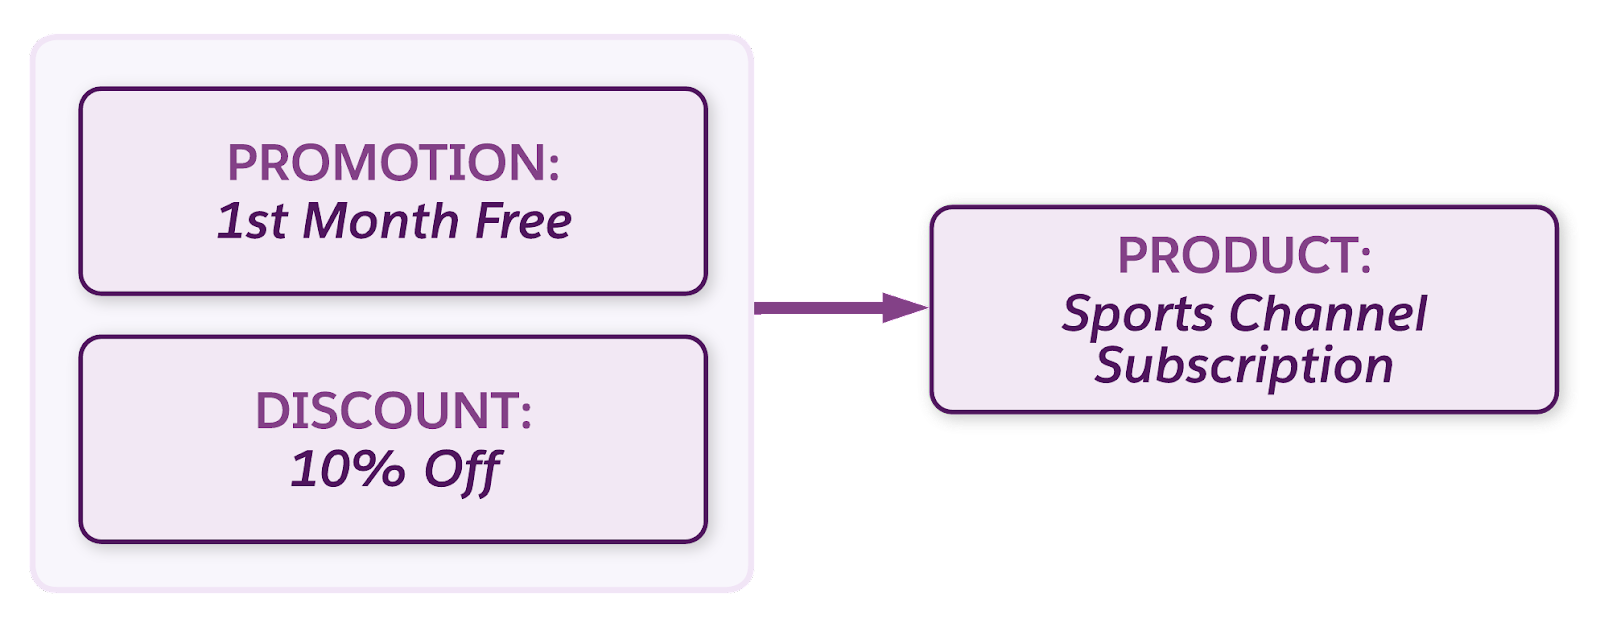 A diagram showing a First Month Free promotion and a 10% Off discount for a sports channel subscription product